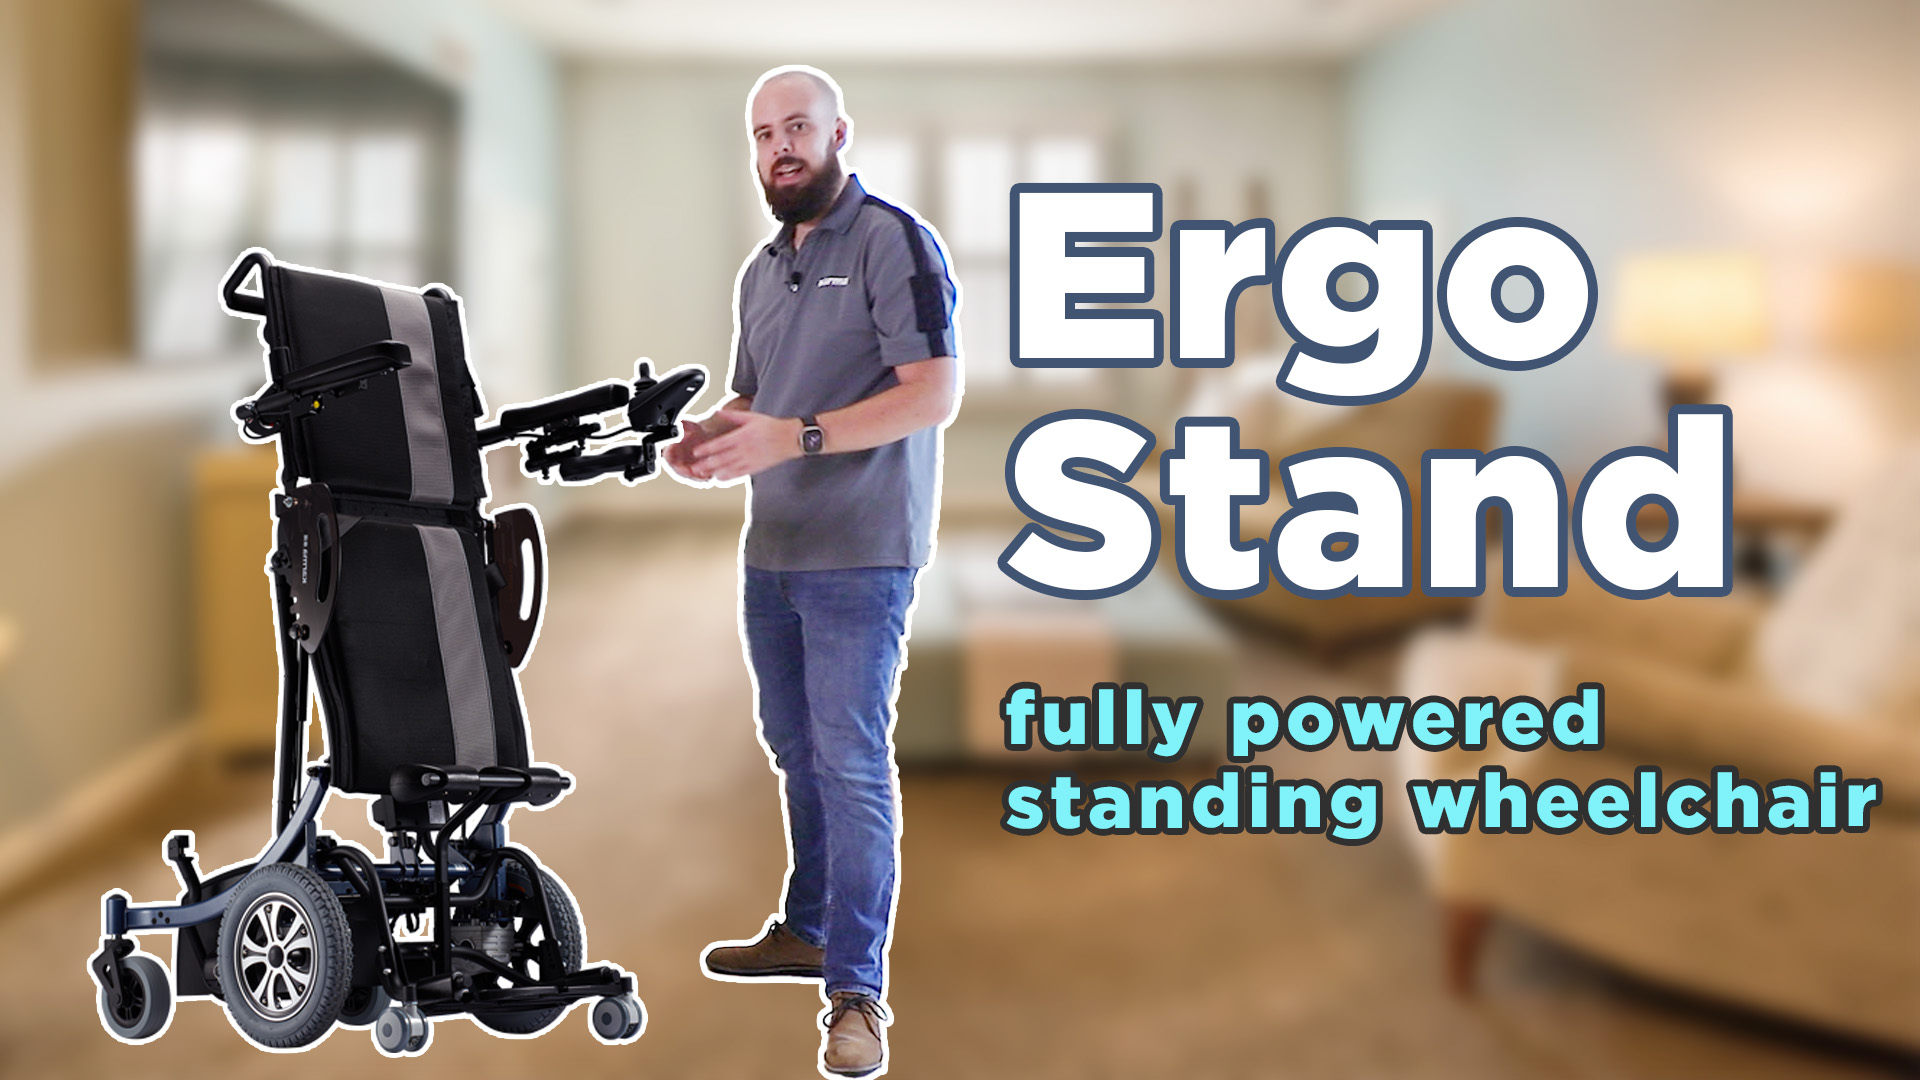 Ergo Stand - Power Wheelchair with Power Standing Function